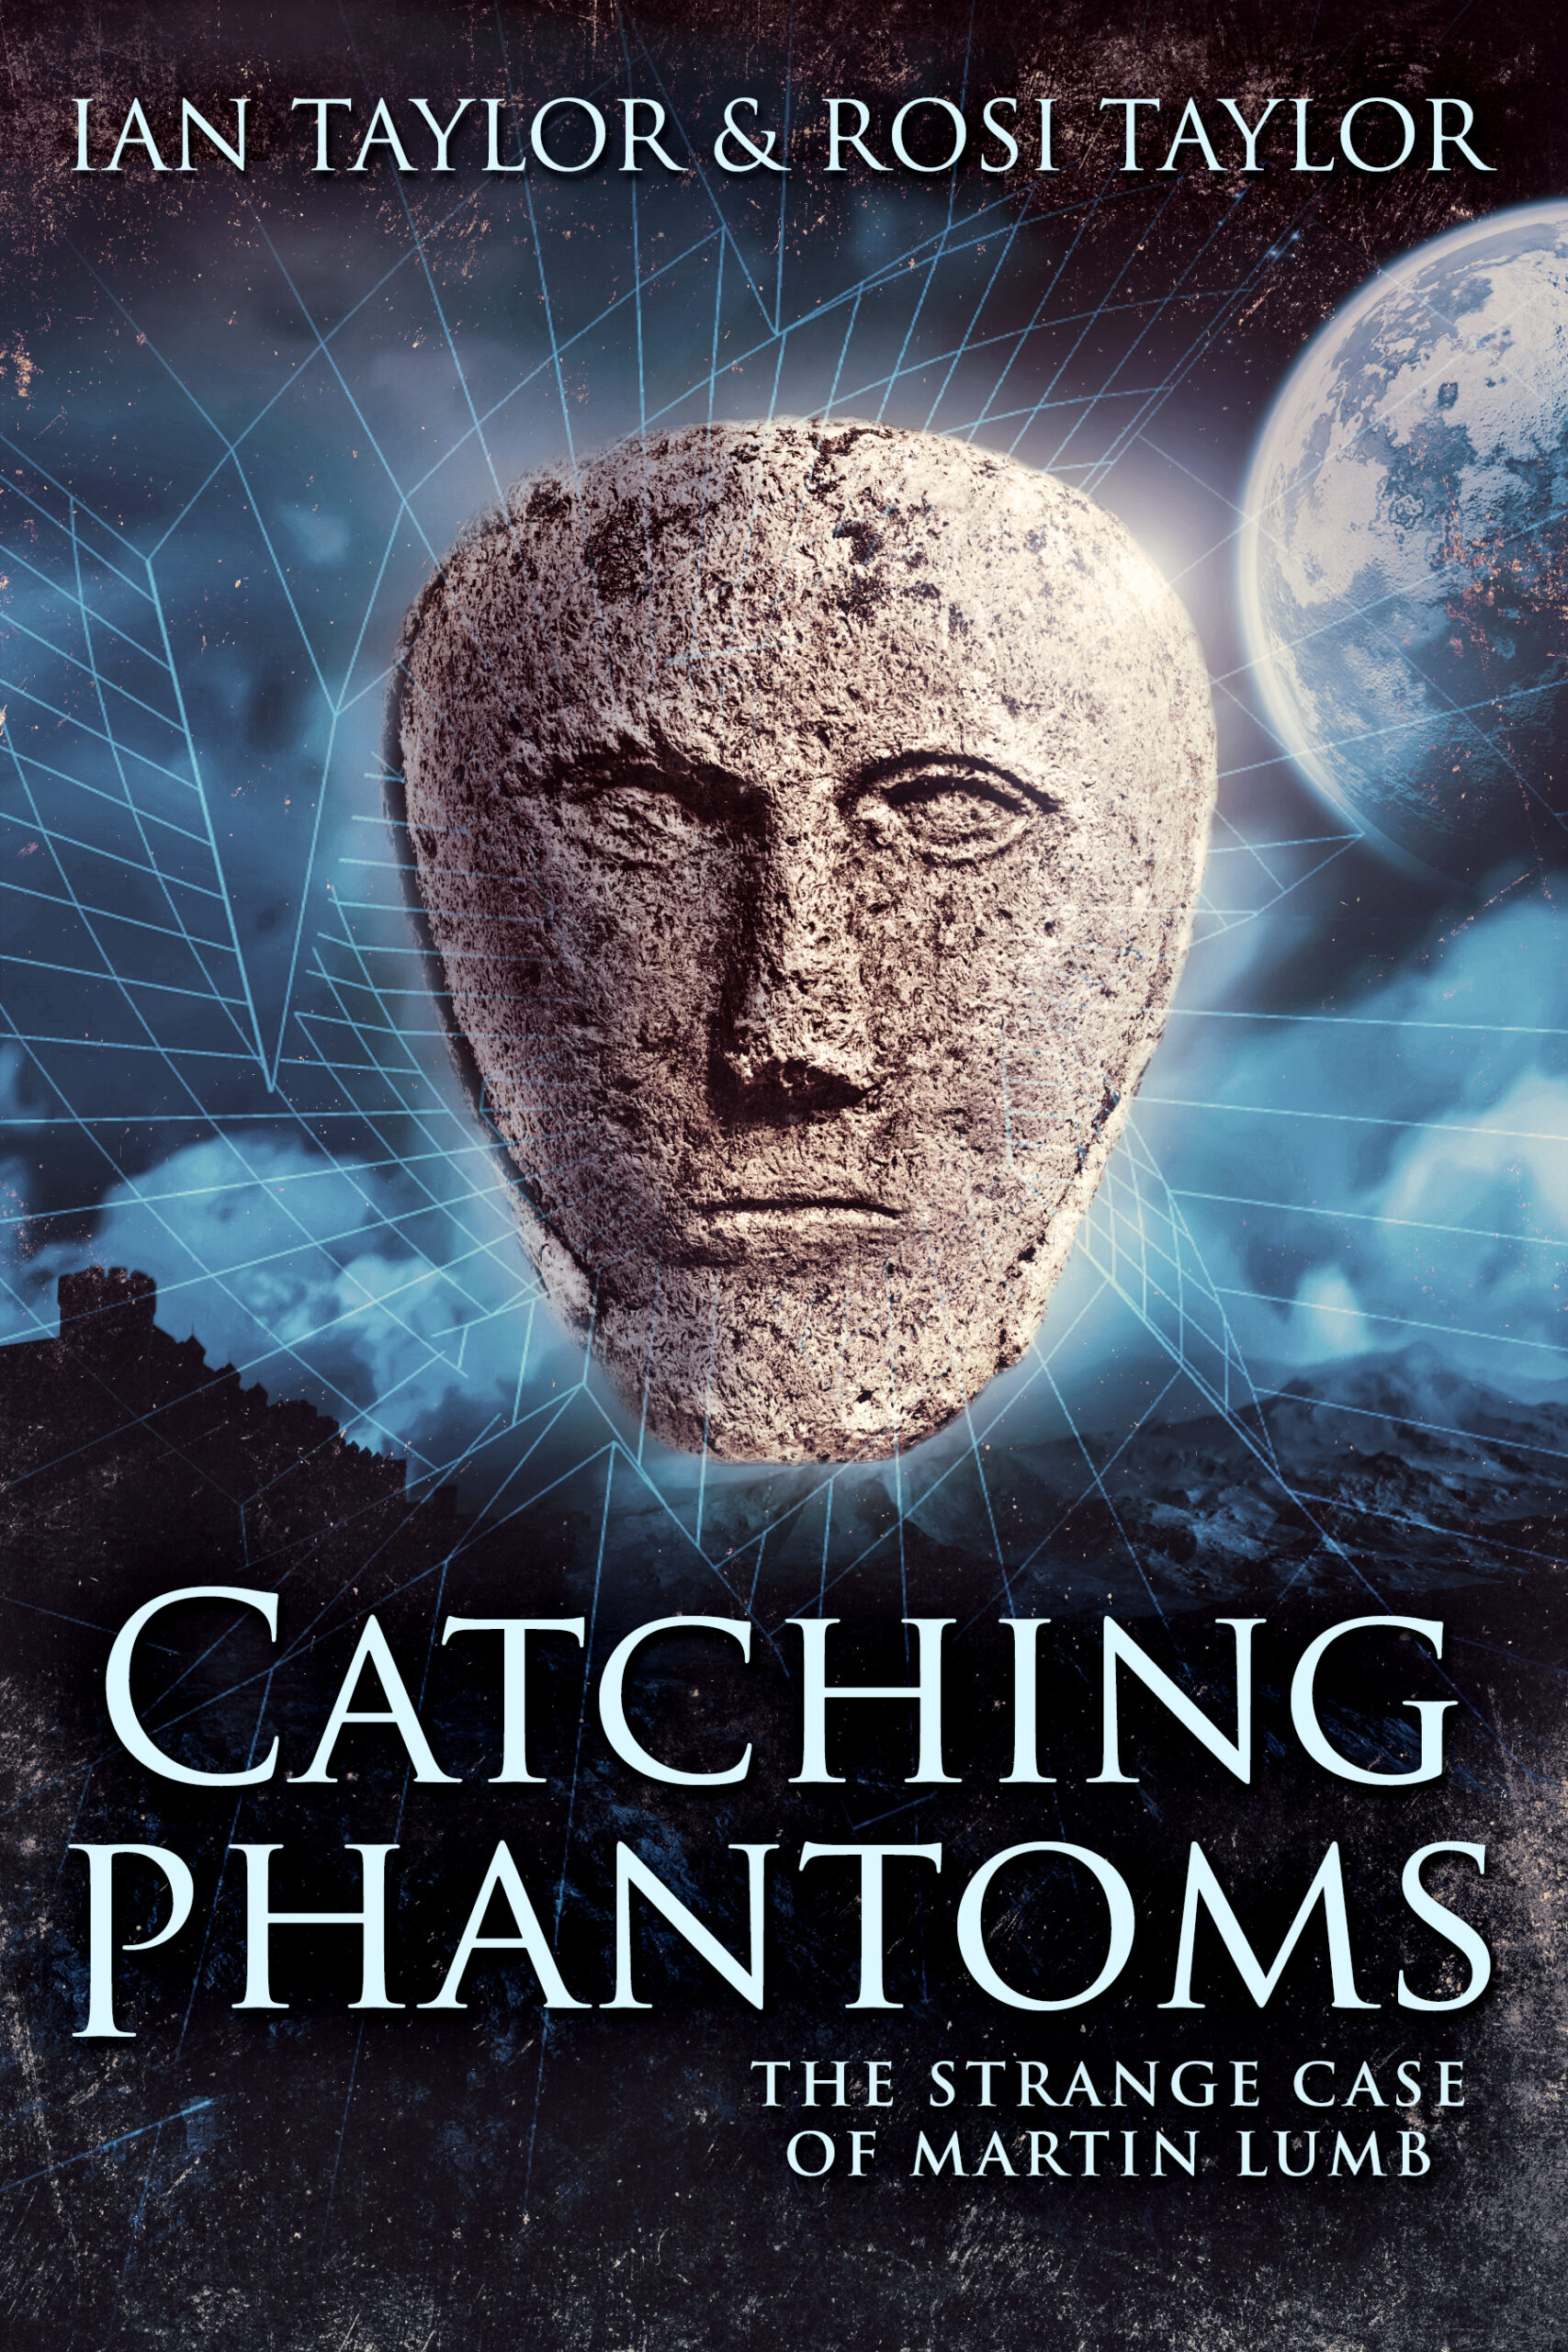 FREE: Catching Phantoms by Ian Taylor